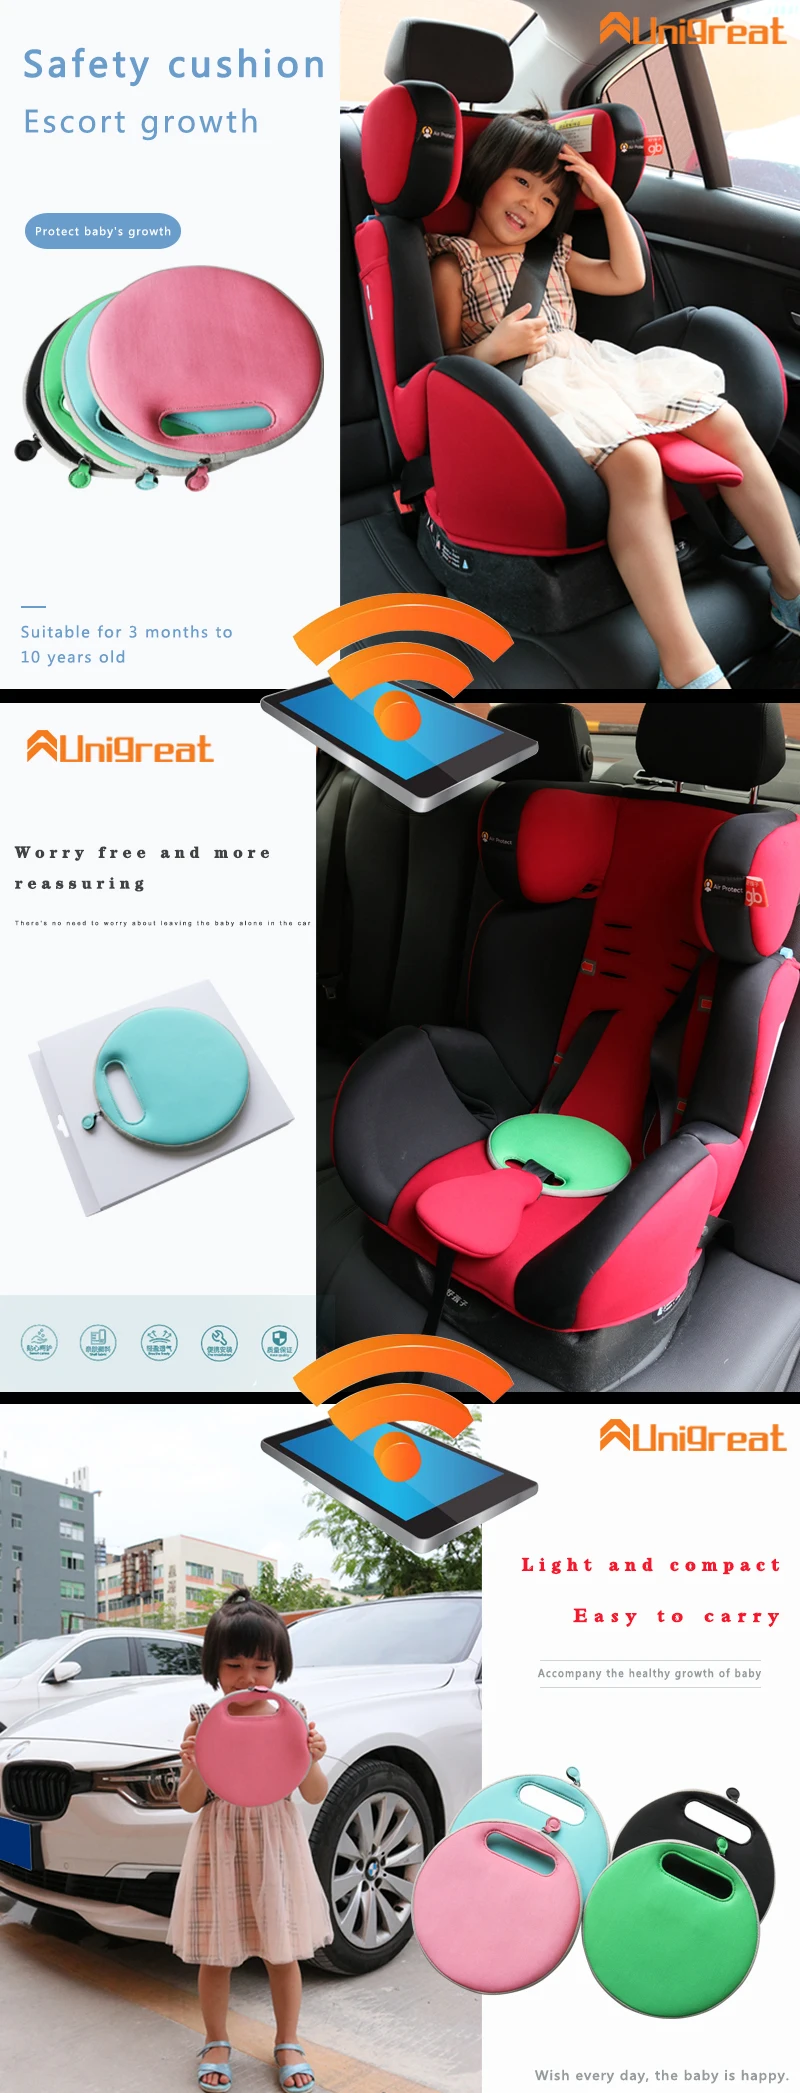 2020 High Quality Car Baby Seat Alarm System Baby Alert Car Alarm Safety Seat Pad With Remind Pressure Sensor Pad